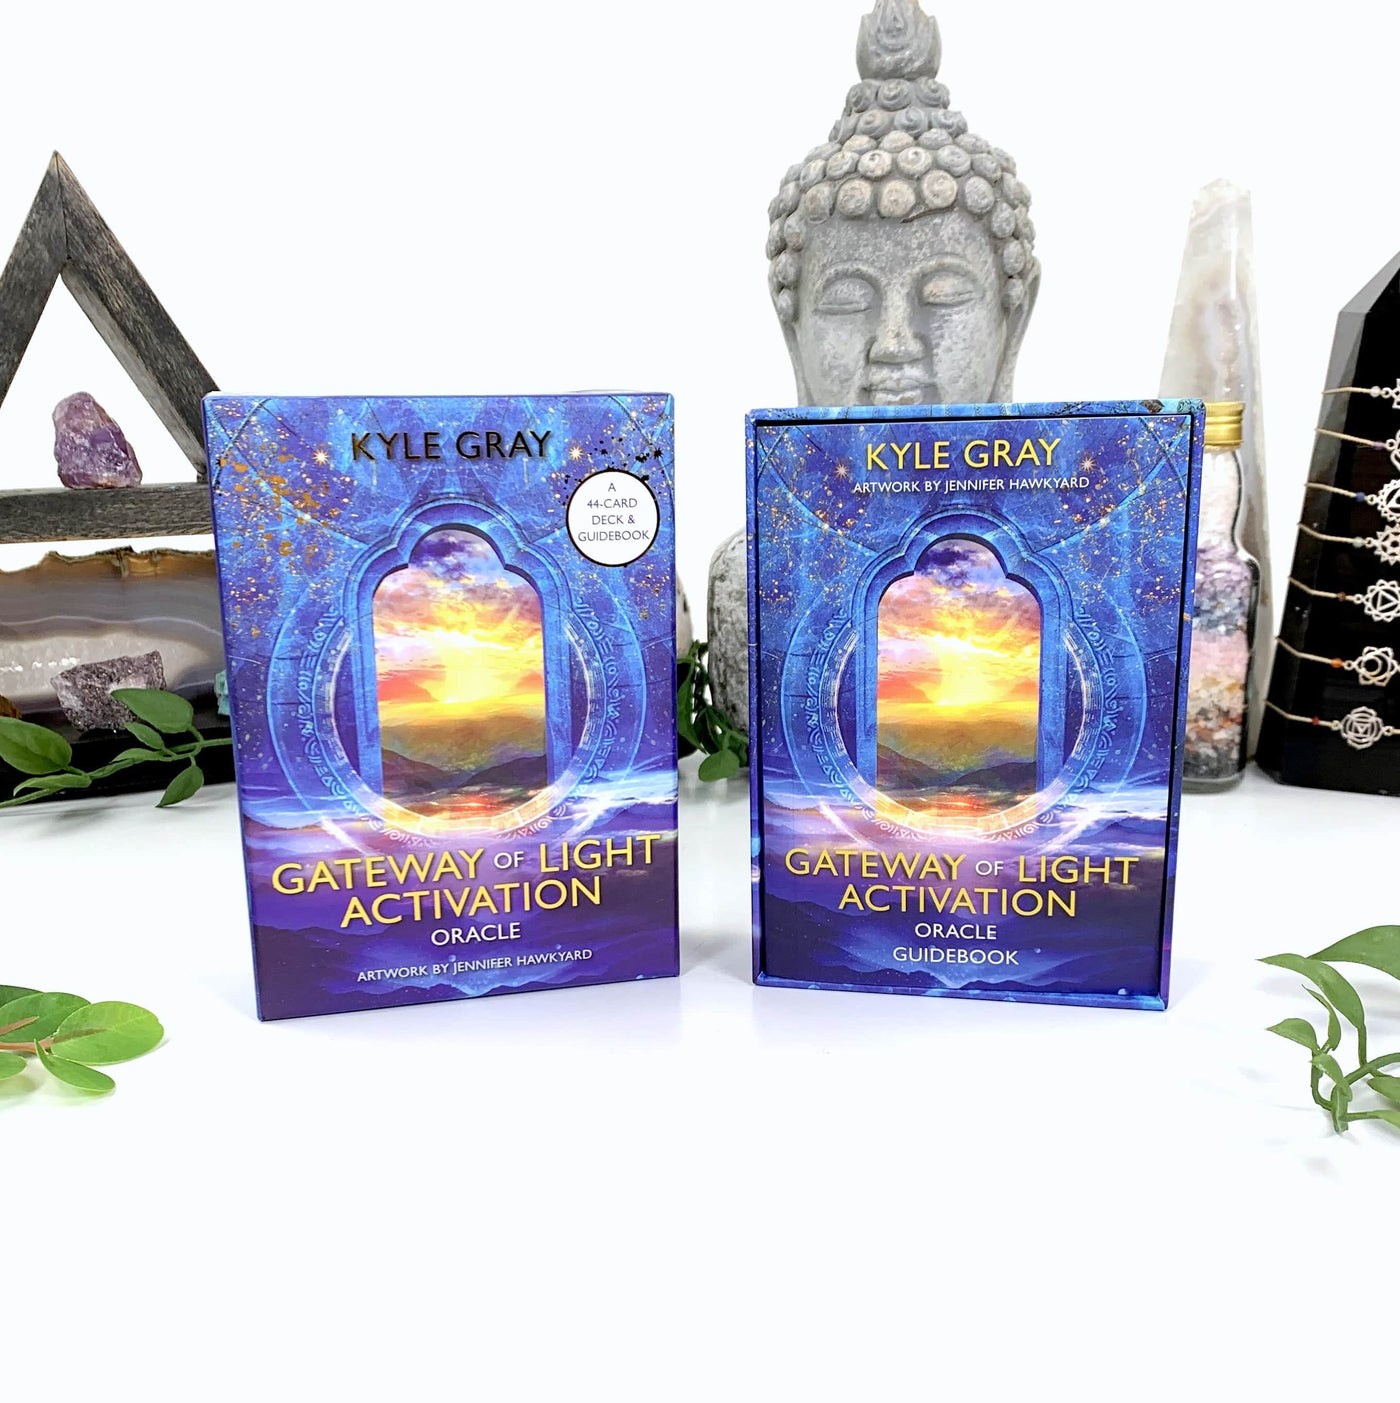 Image of back and front of the oracle card box on a white background with a budha statue as a background prop.  Box is blue with a printed window showing a sunset over mountains.